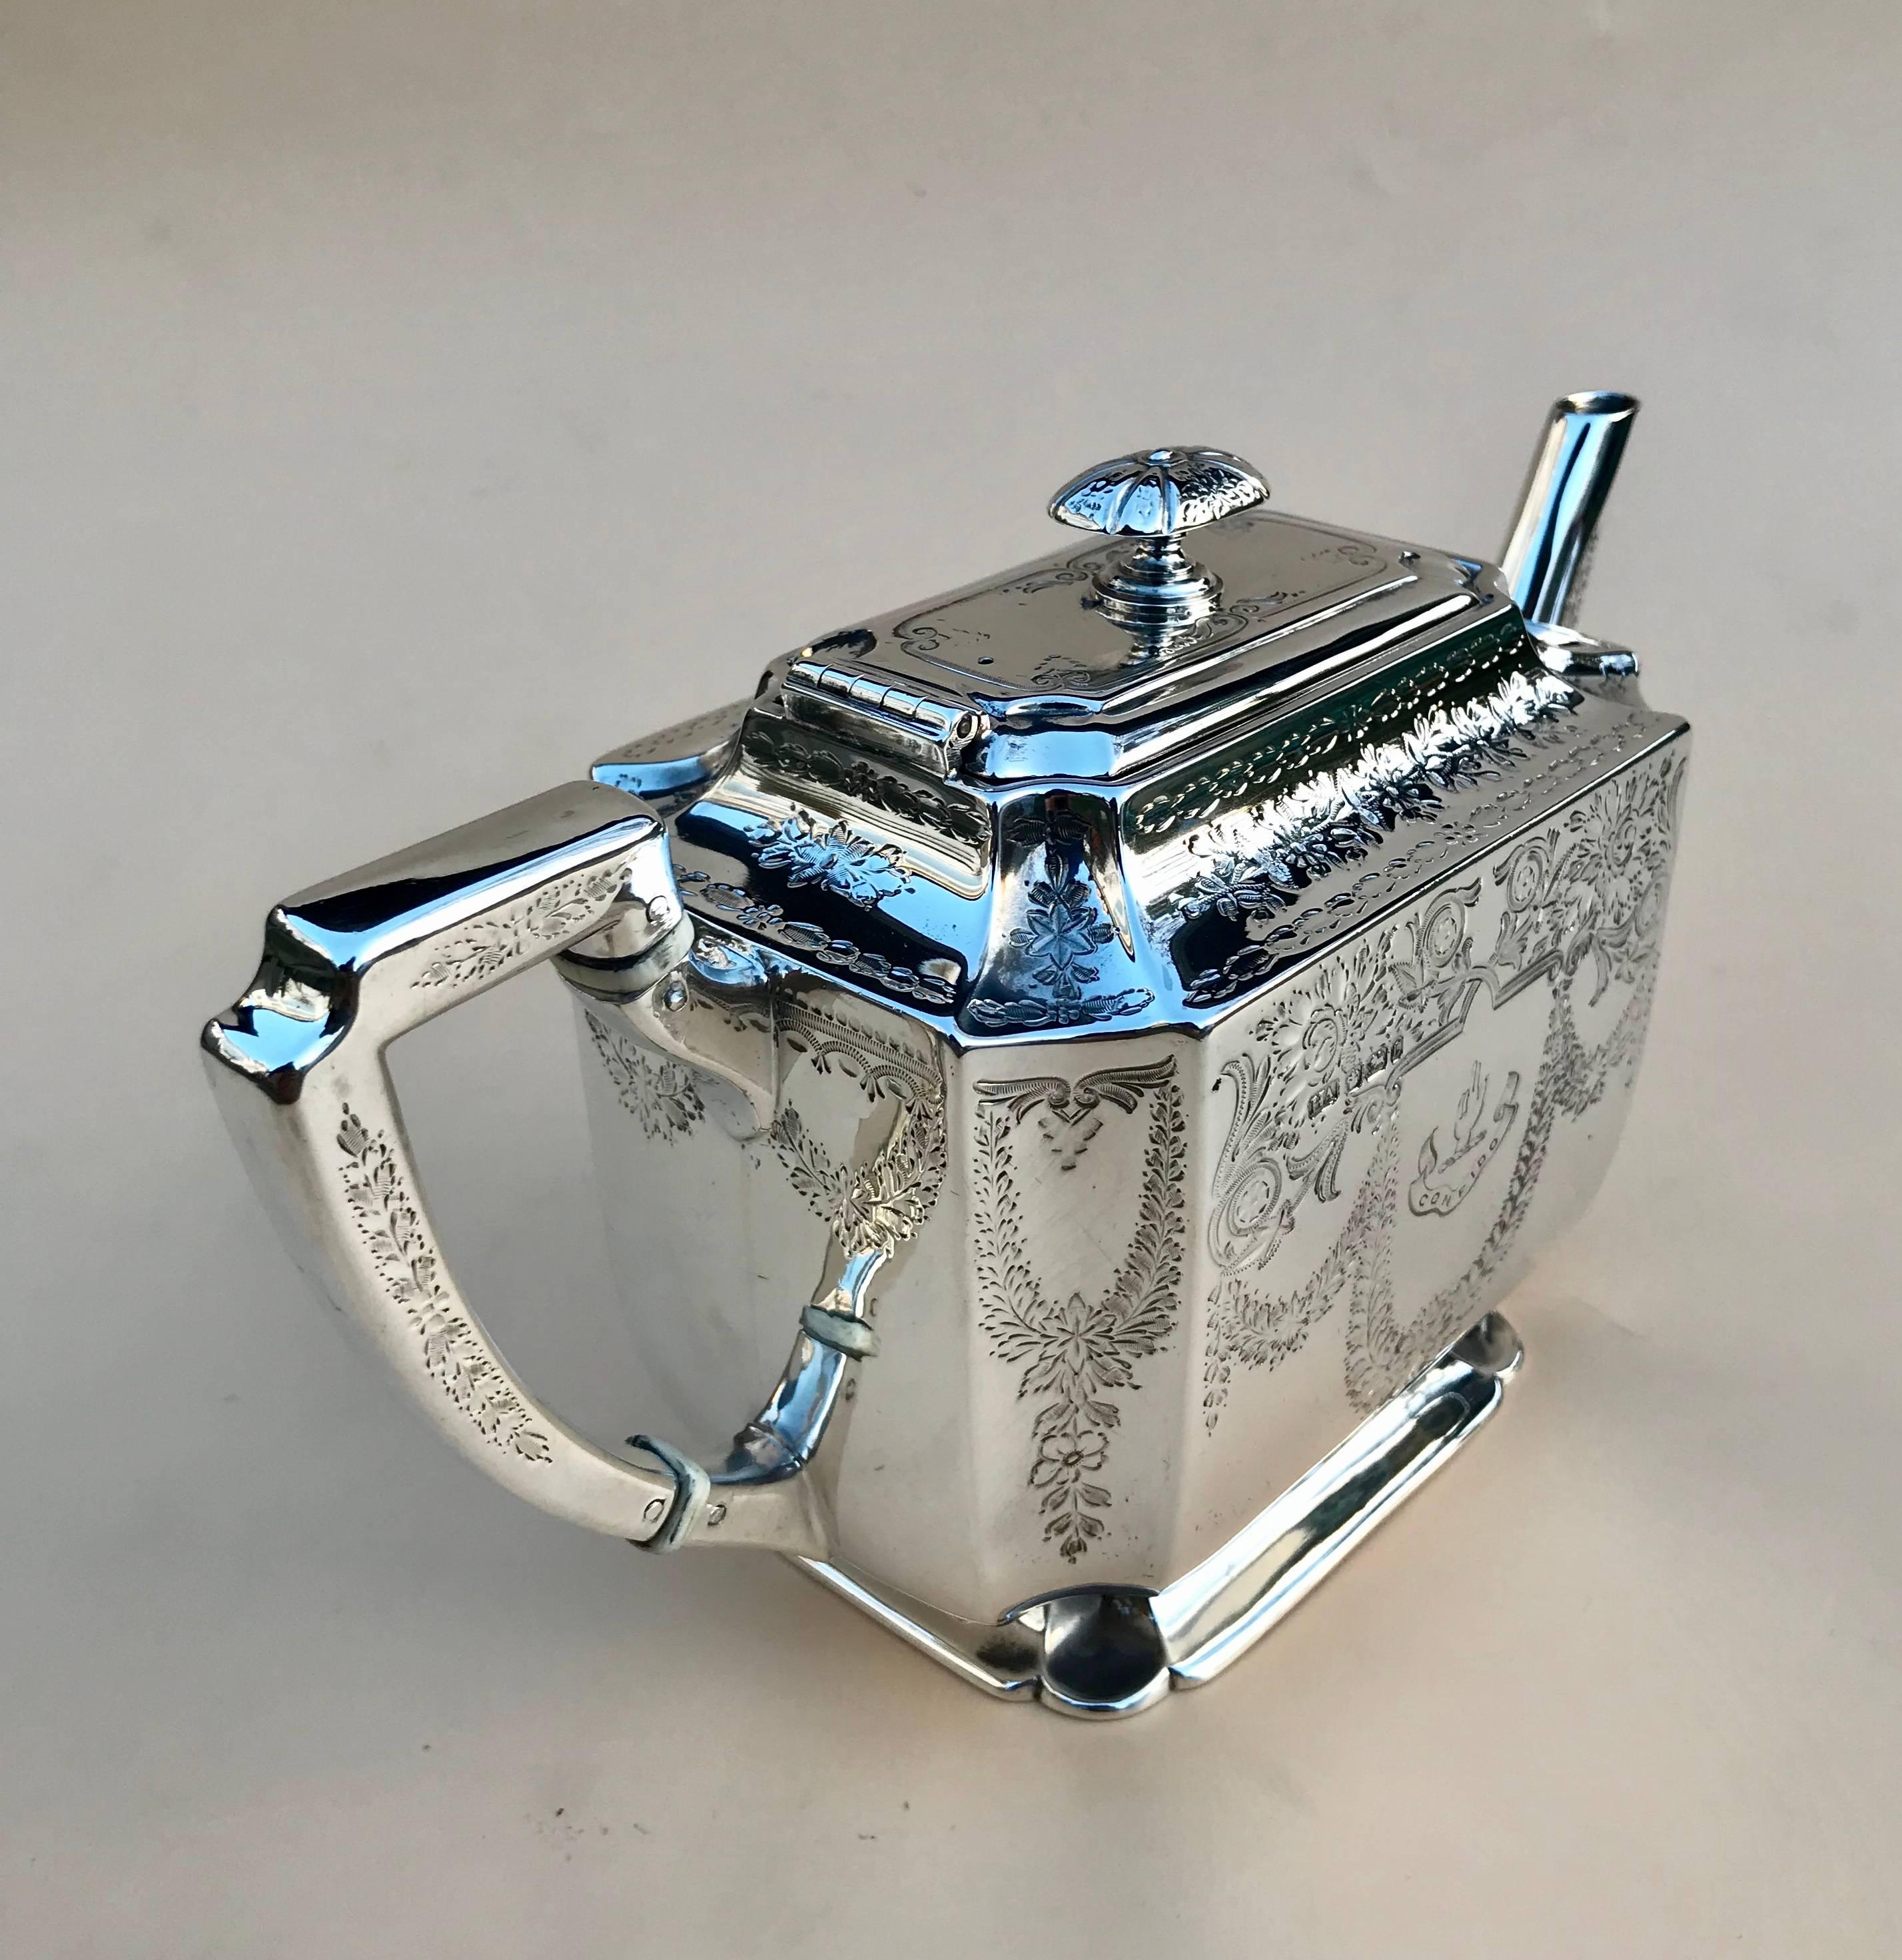 Victorian Silver Batchelor’s Teapot By Atkin Brothers of Sheffield 1895

This is a very attractive piece, the design has rectangular shape and is decorated with flowers and acanthus swags, there is a motto on one side C O N F I D O which translates